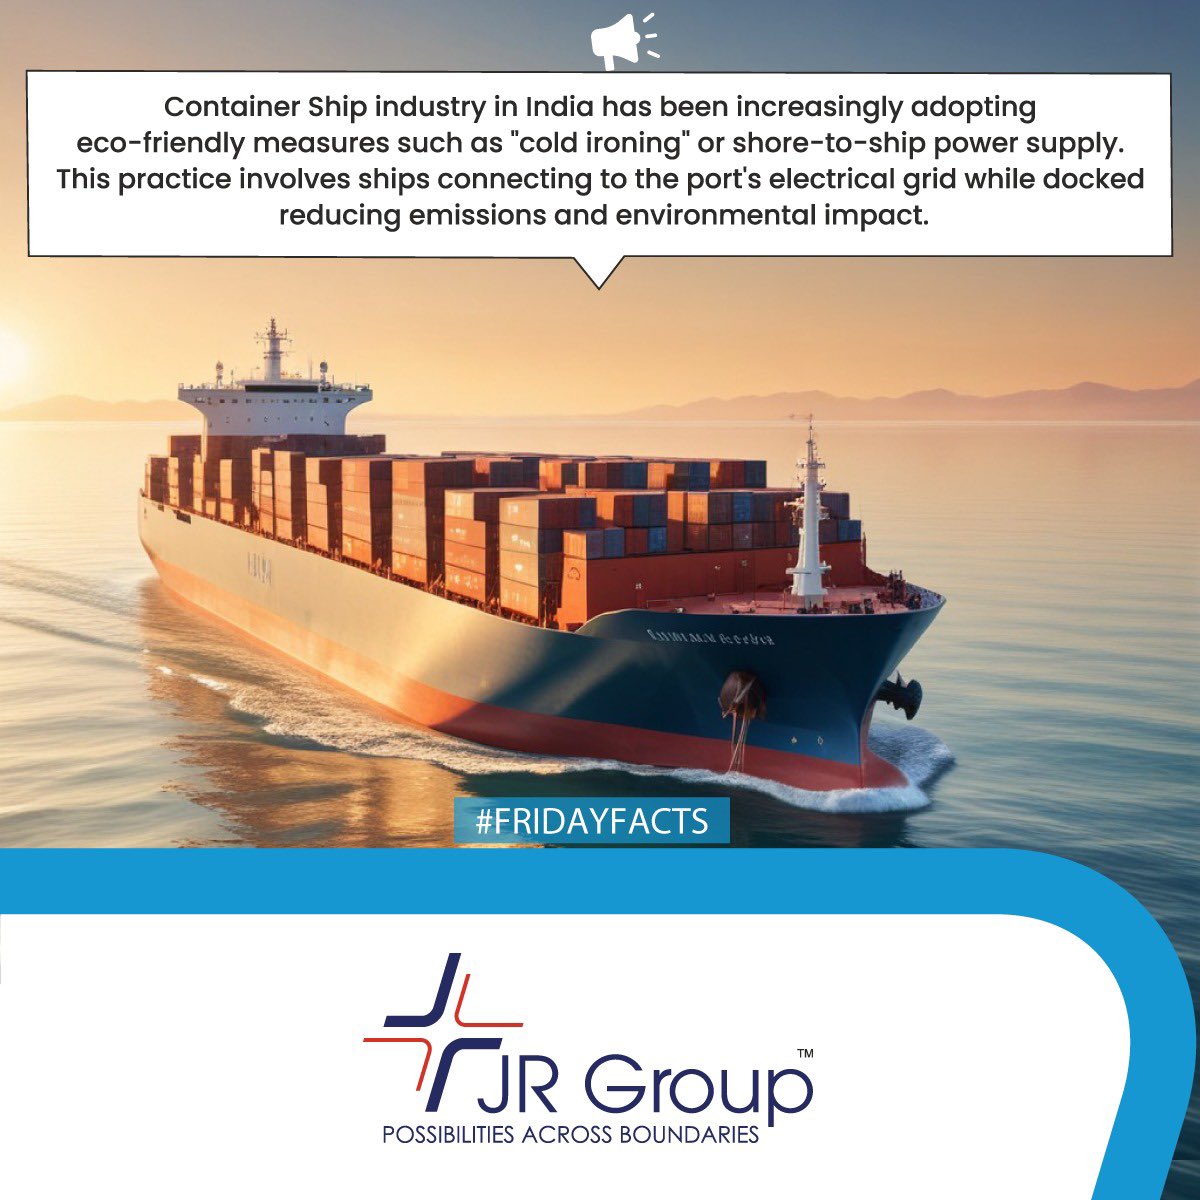 Did you know about ‘Cold Ironing’ before?

#Possibilitiesacrossboundaries #JRgroup #Possible #India #Logistics #Shipping #Petroleum #Corporate #Possibility #possibilities #Gobeyond #Focus #focusonpossible #Fact #FridayFacts